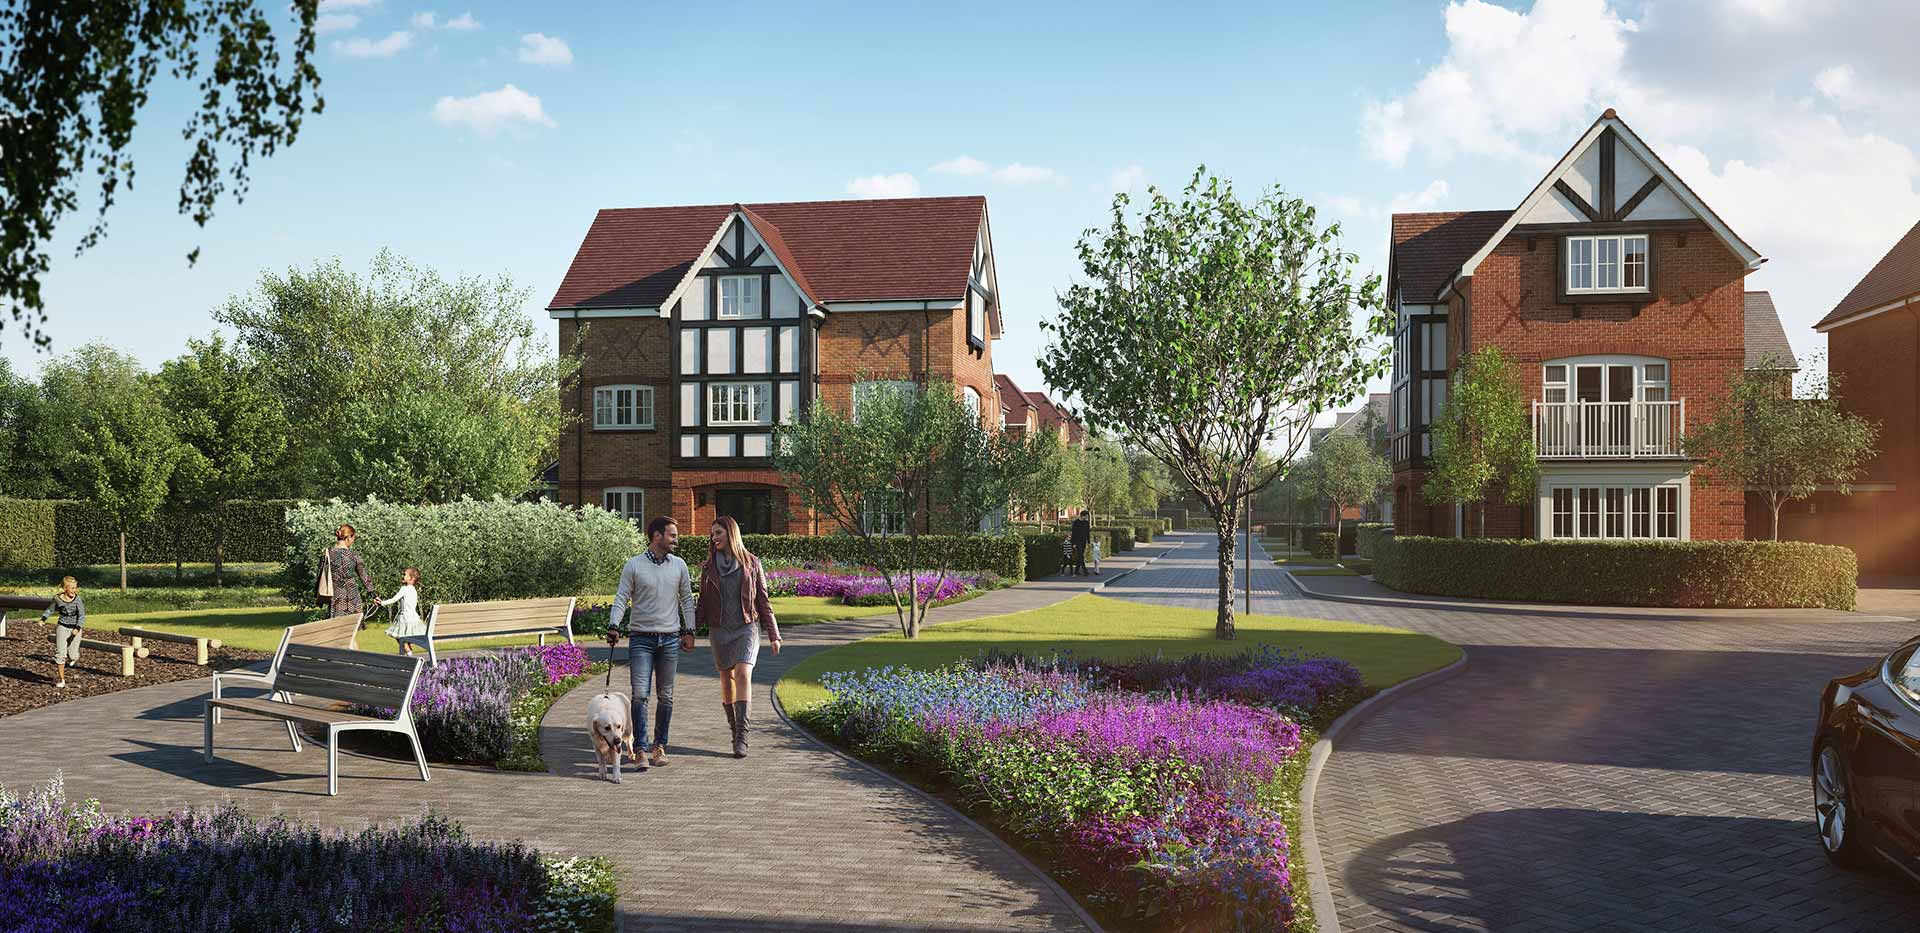 Sunninghill Square is a boutique development nestled in a highly sought-after location neighbouring Ascot and Windsor.